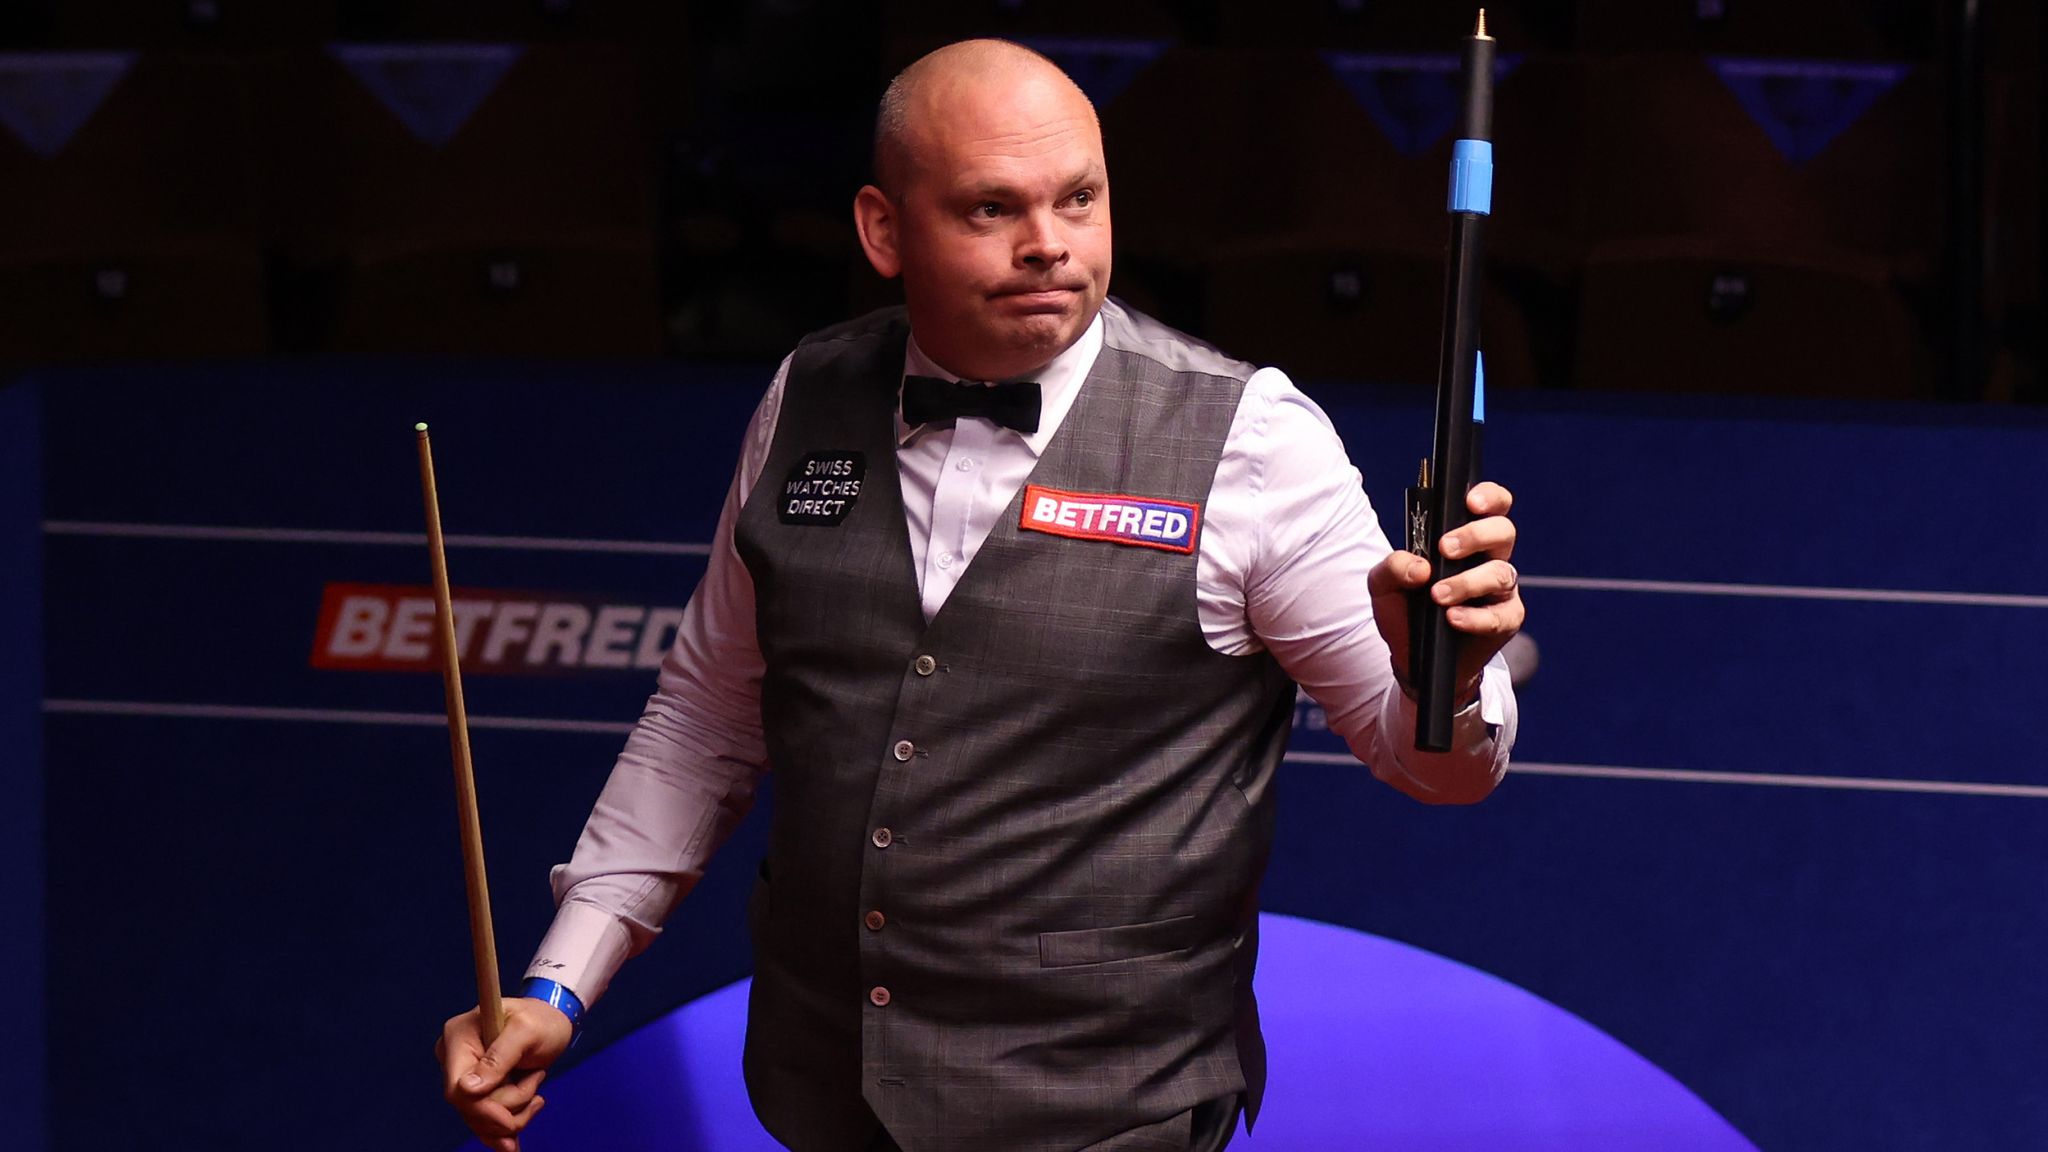 World Snooker Championship Stuart Bingham on his 147 dreams and why Ronnie OSullivan still rules on the green baize Snooker News Sky Sports